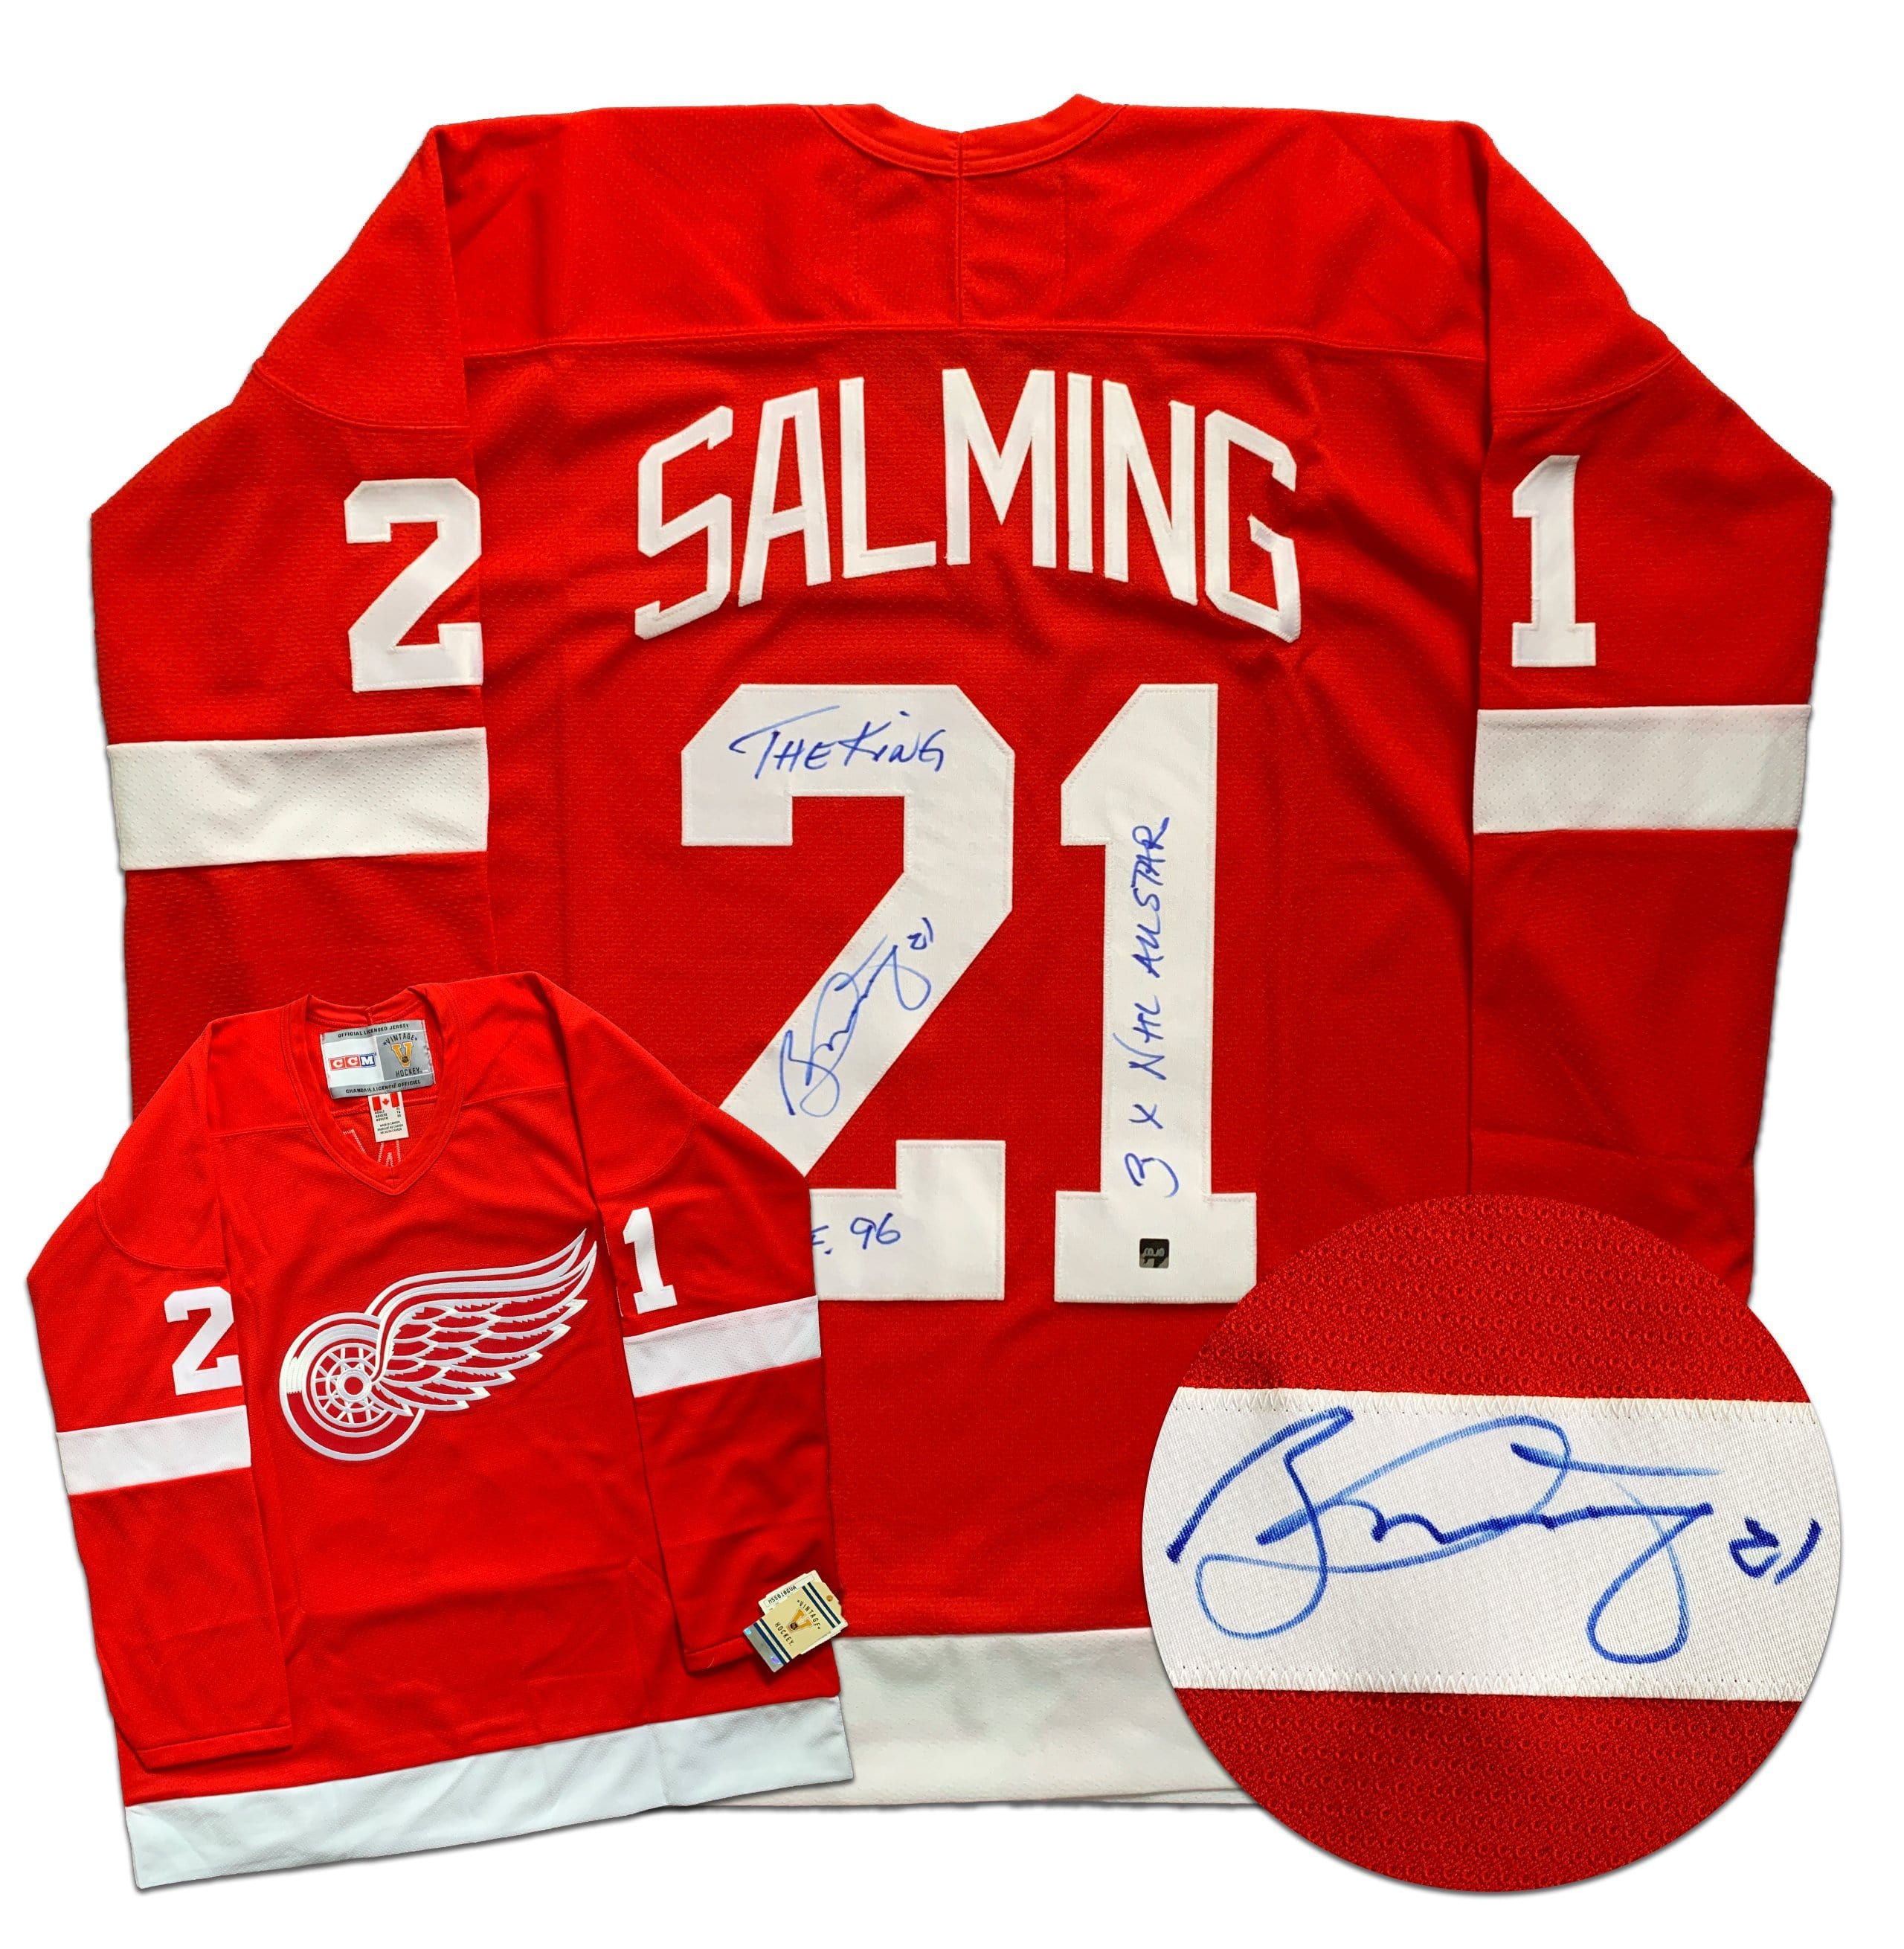 borje salming jersey for sale